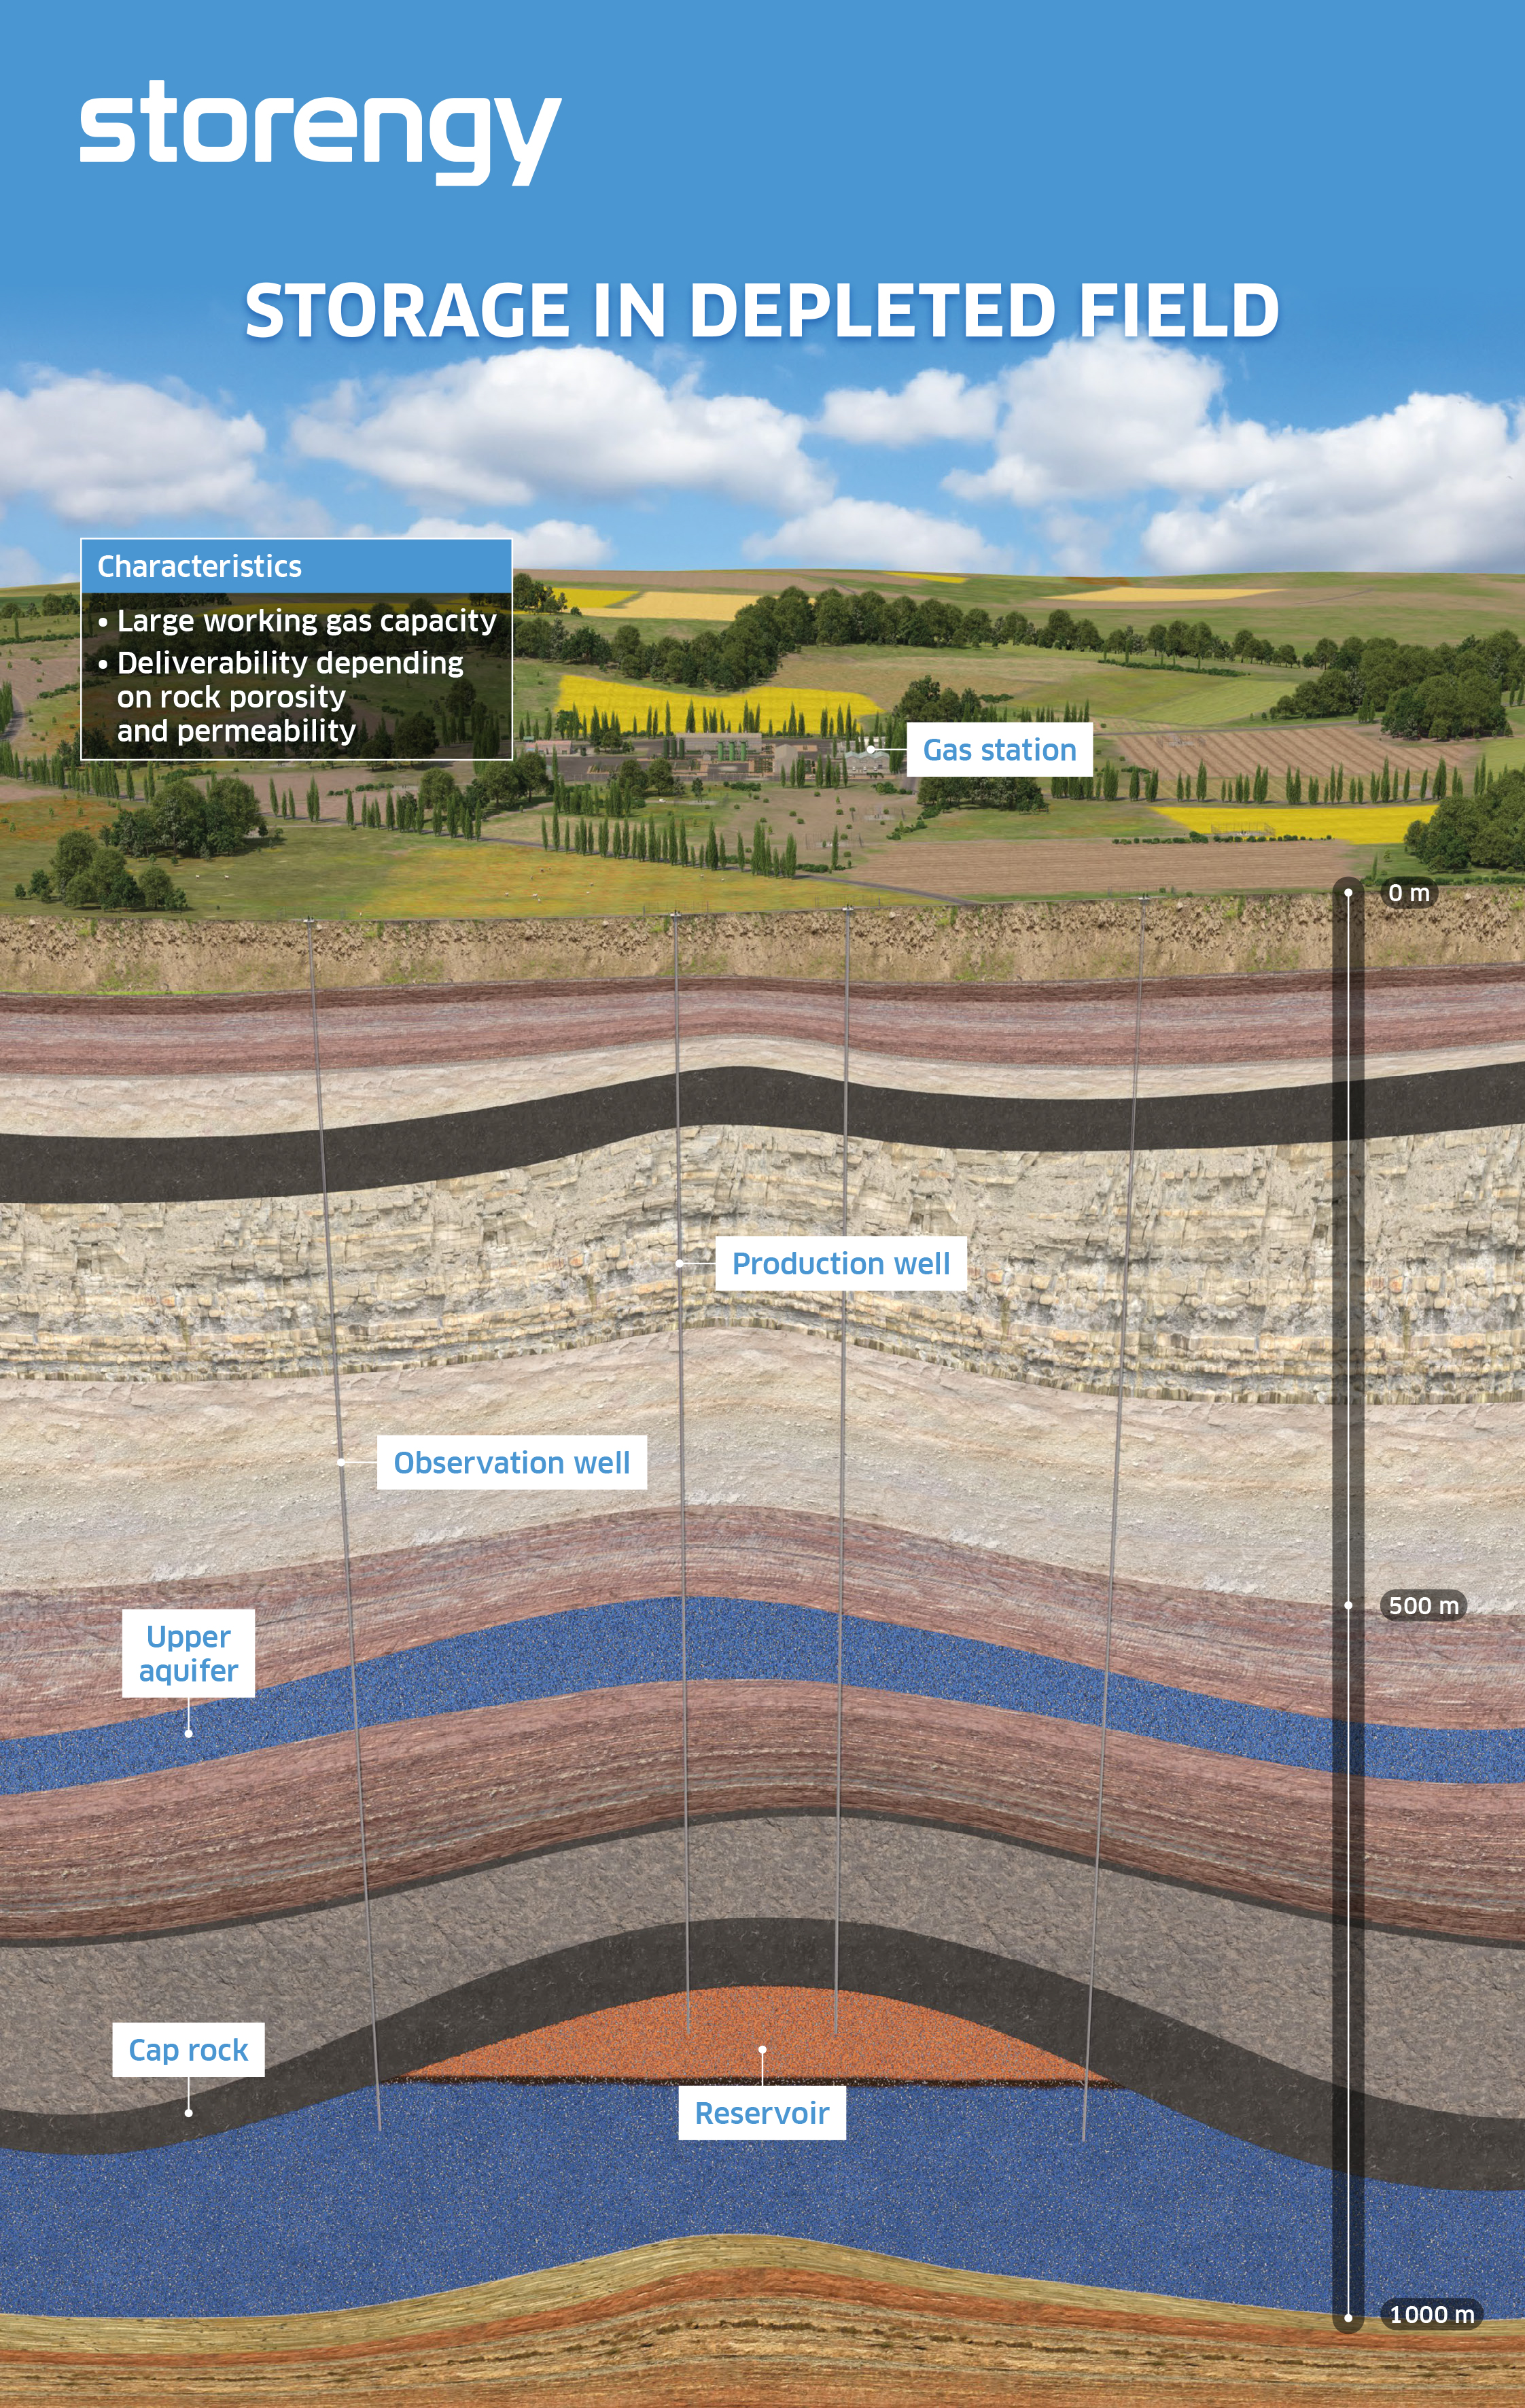 Cross-section of an underground gas storage in a depleted field. Find the detailed description below the image